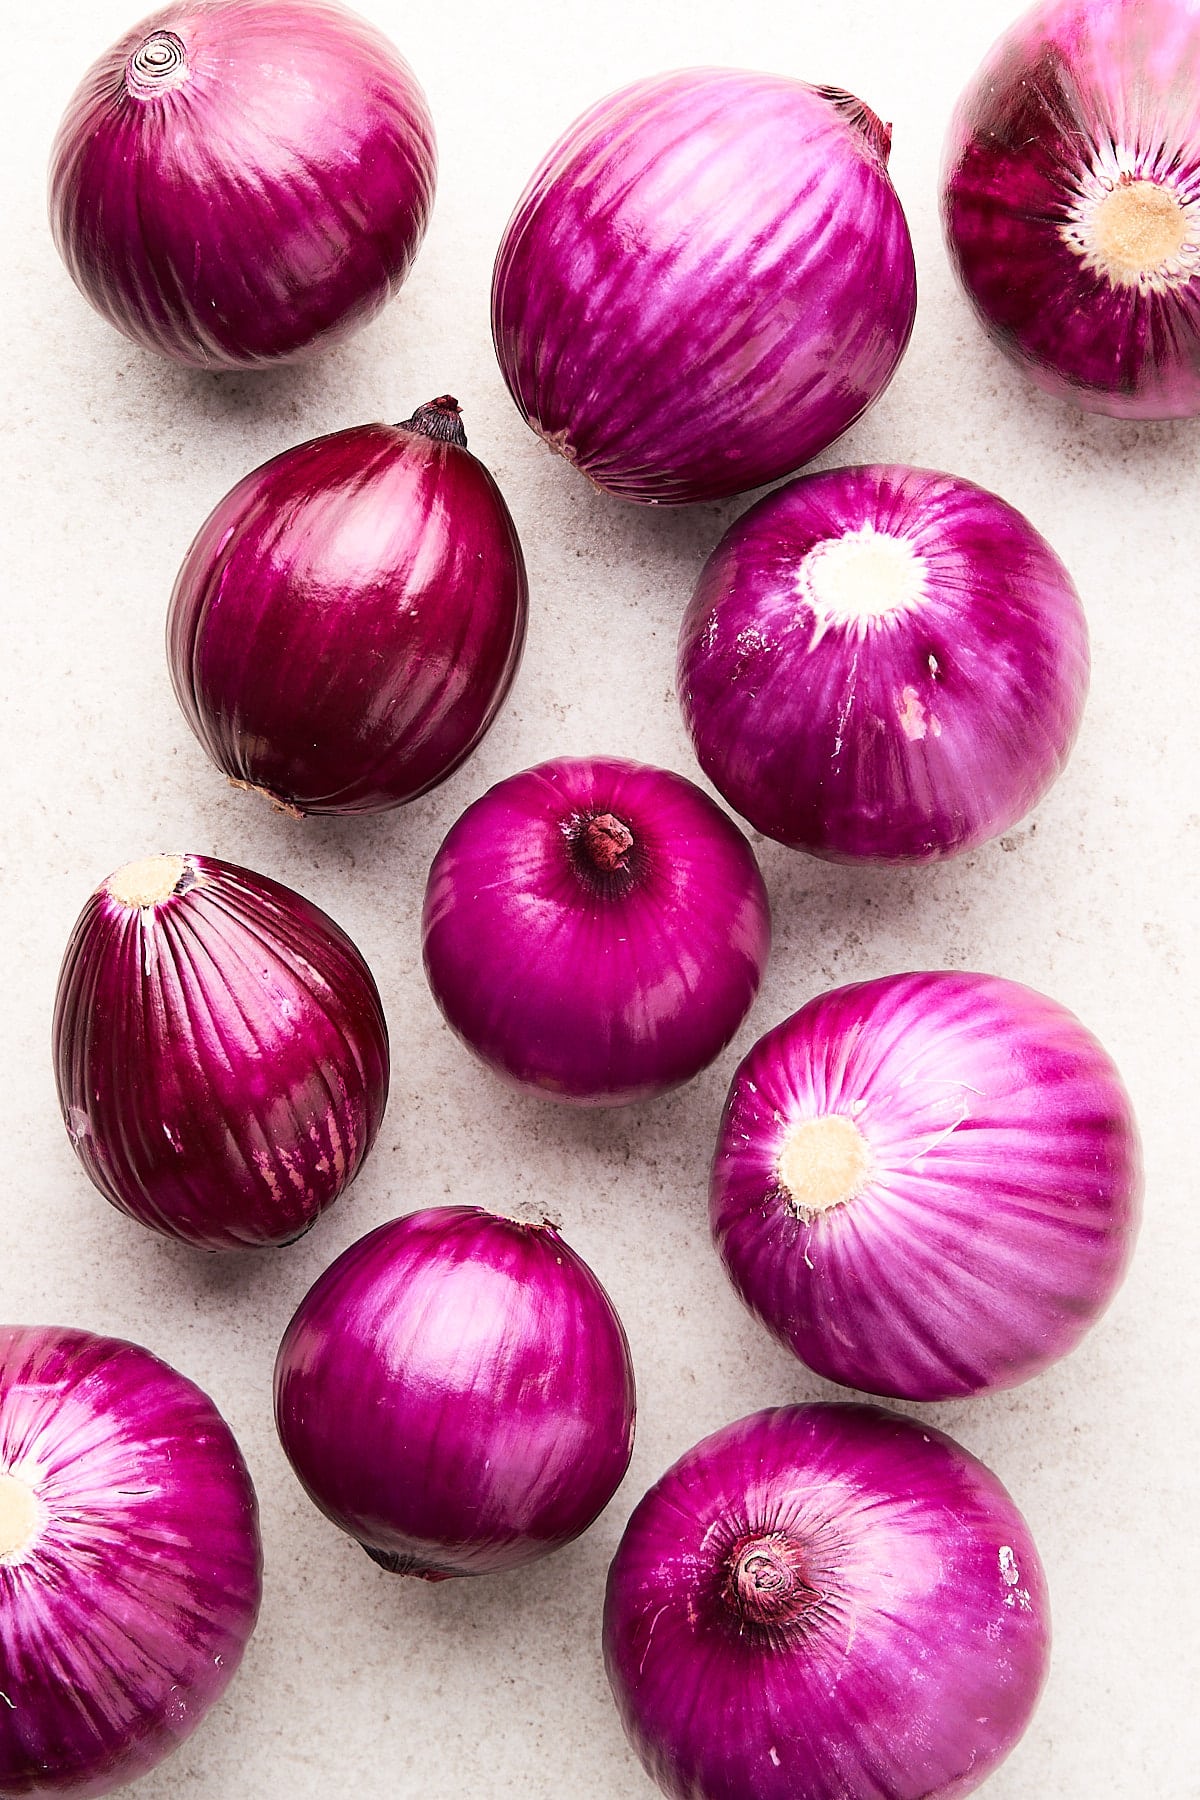 Red onions on a table.